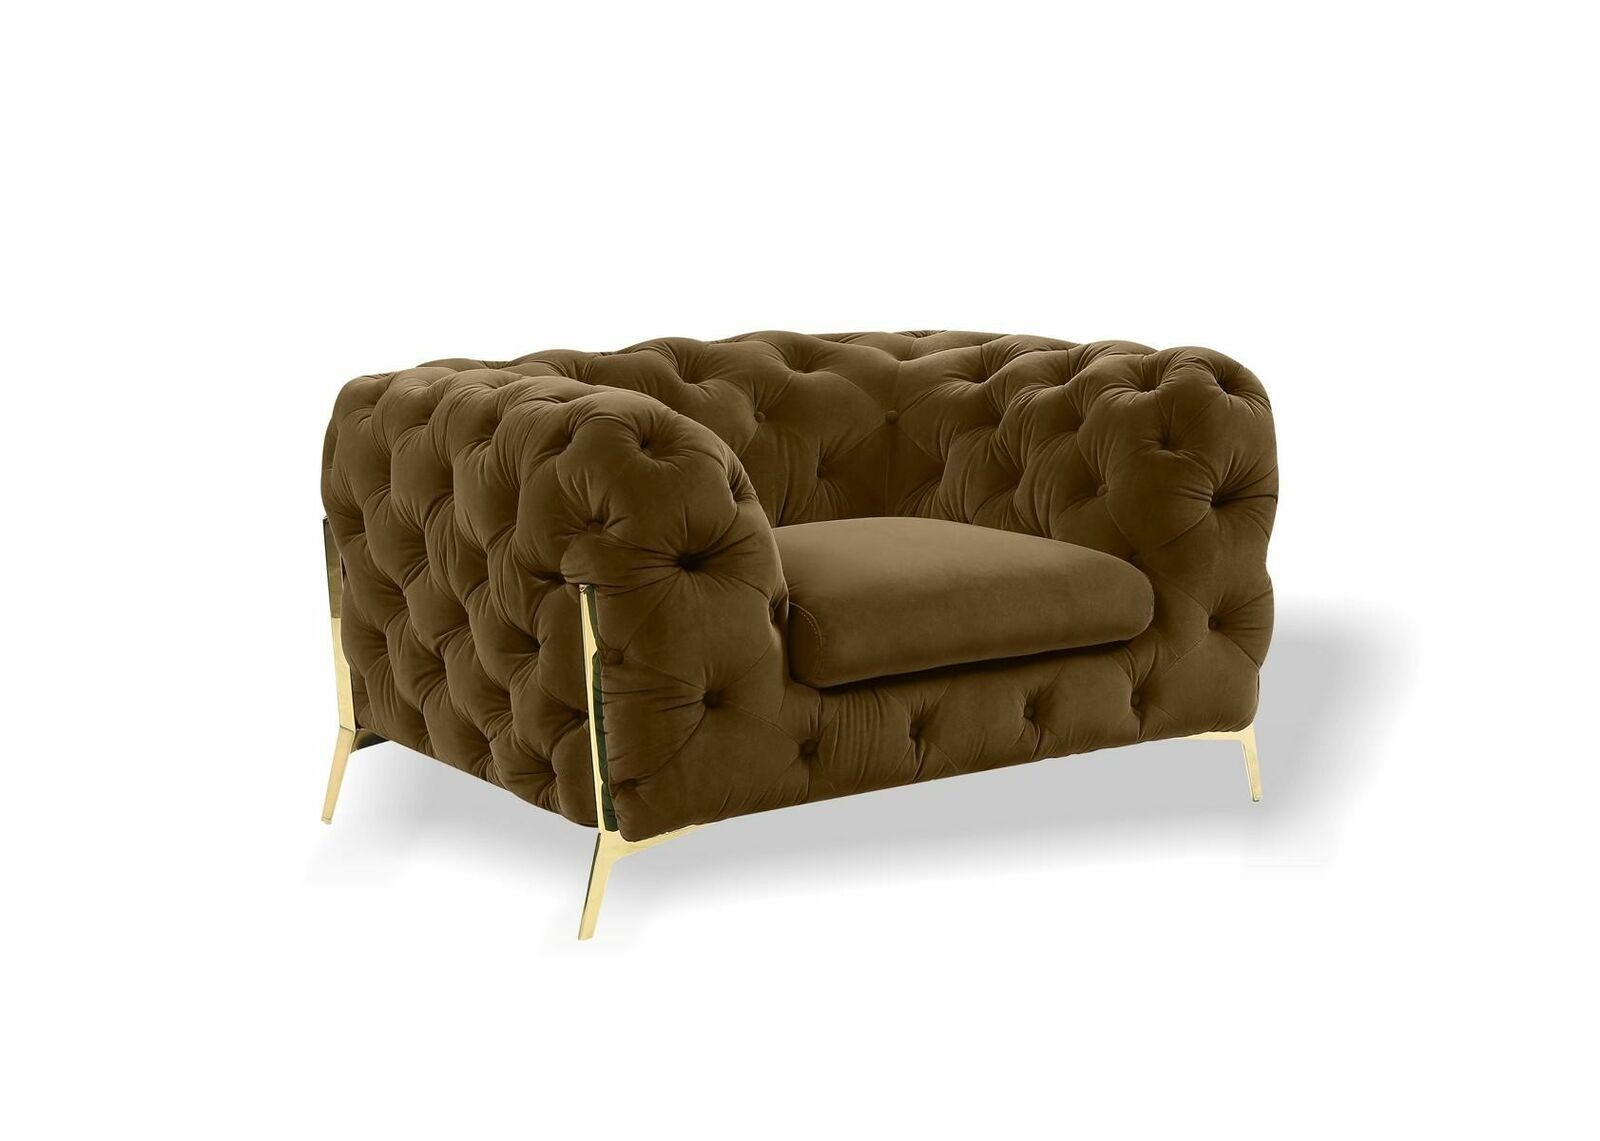 JVmoebel Ohrensessel Chesterfield Ohrensessel Sessel 1 Sitzer Sofa Couch Polster Couch (Sessel), Made in Europe Braun